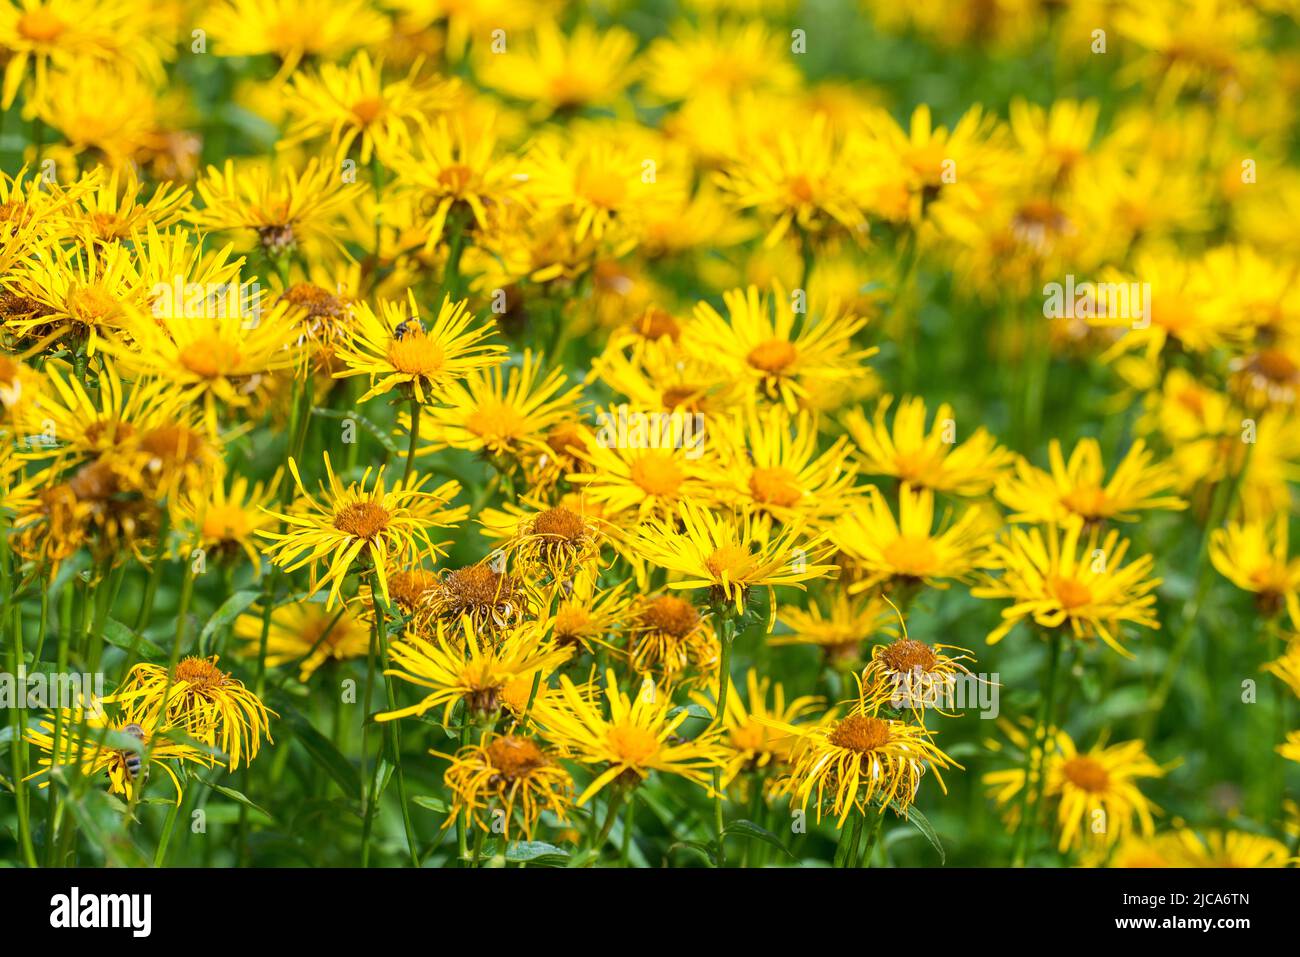 Inula salicina (common name Irish fleabane (UK) or willowleaf yellowhead) is a plant species in the genus Inula in the family Asteraceae. Stock Photo